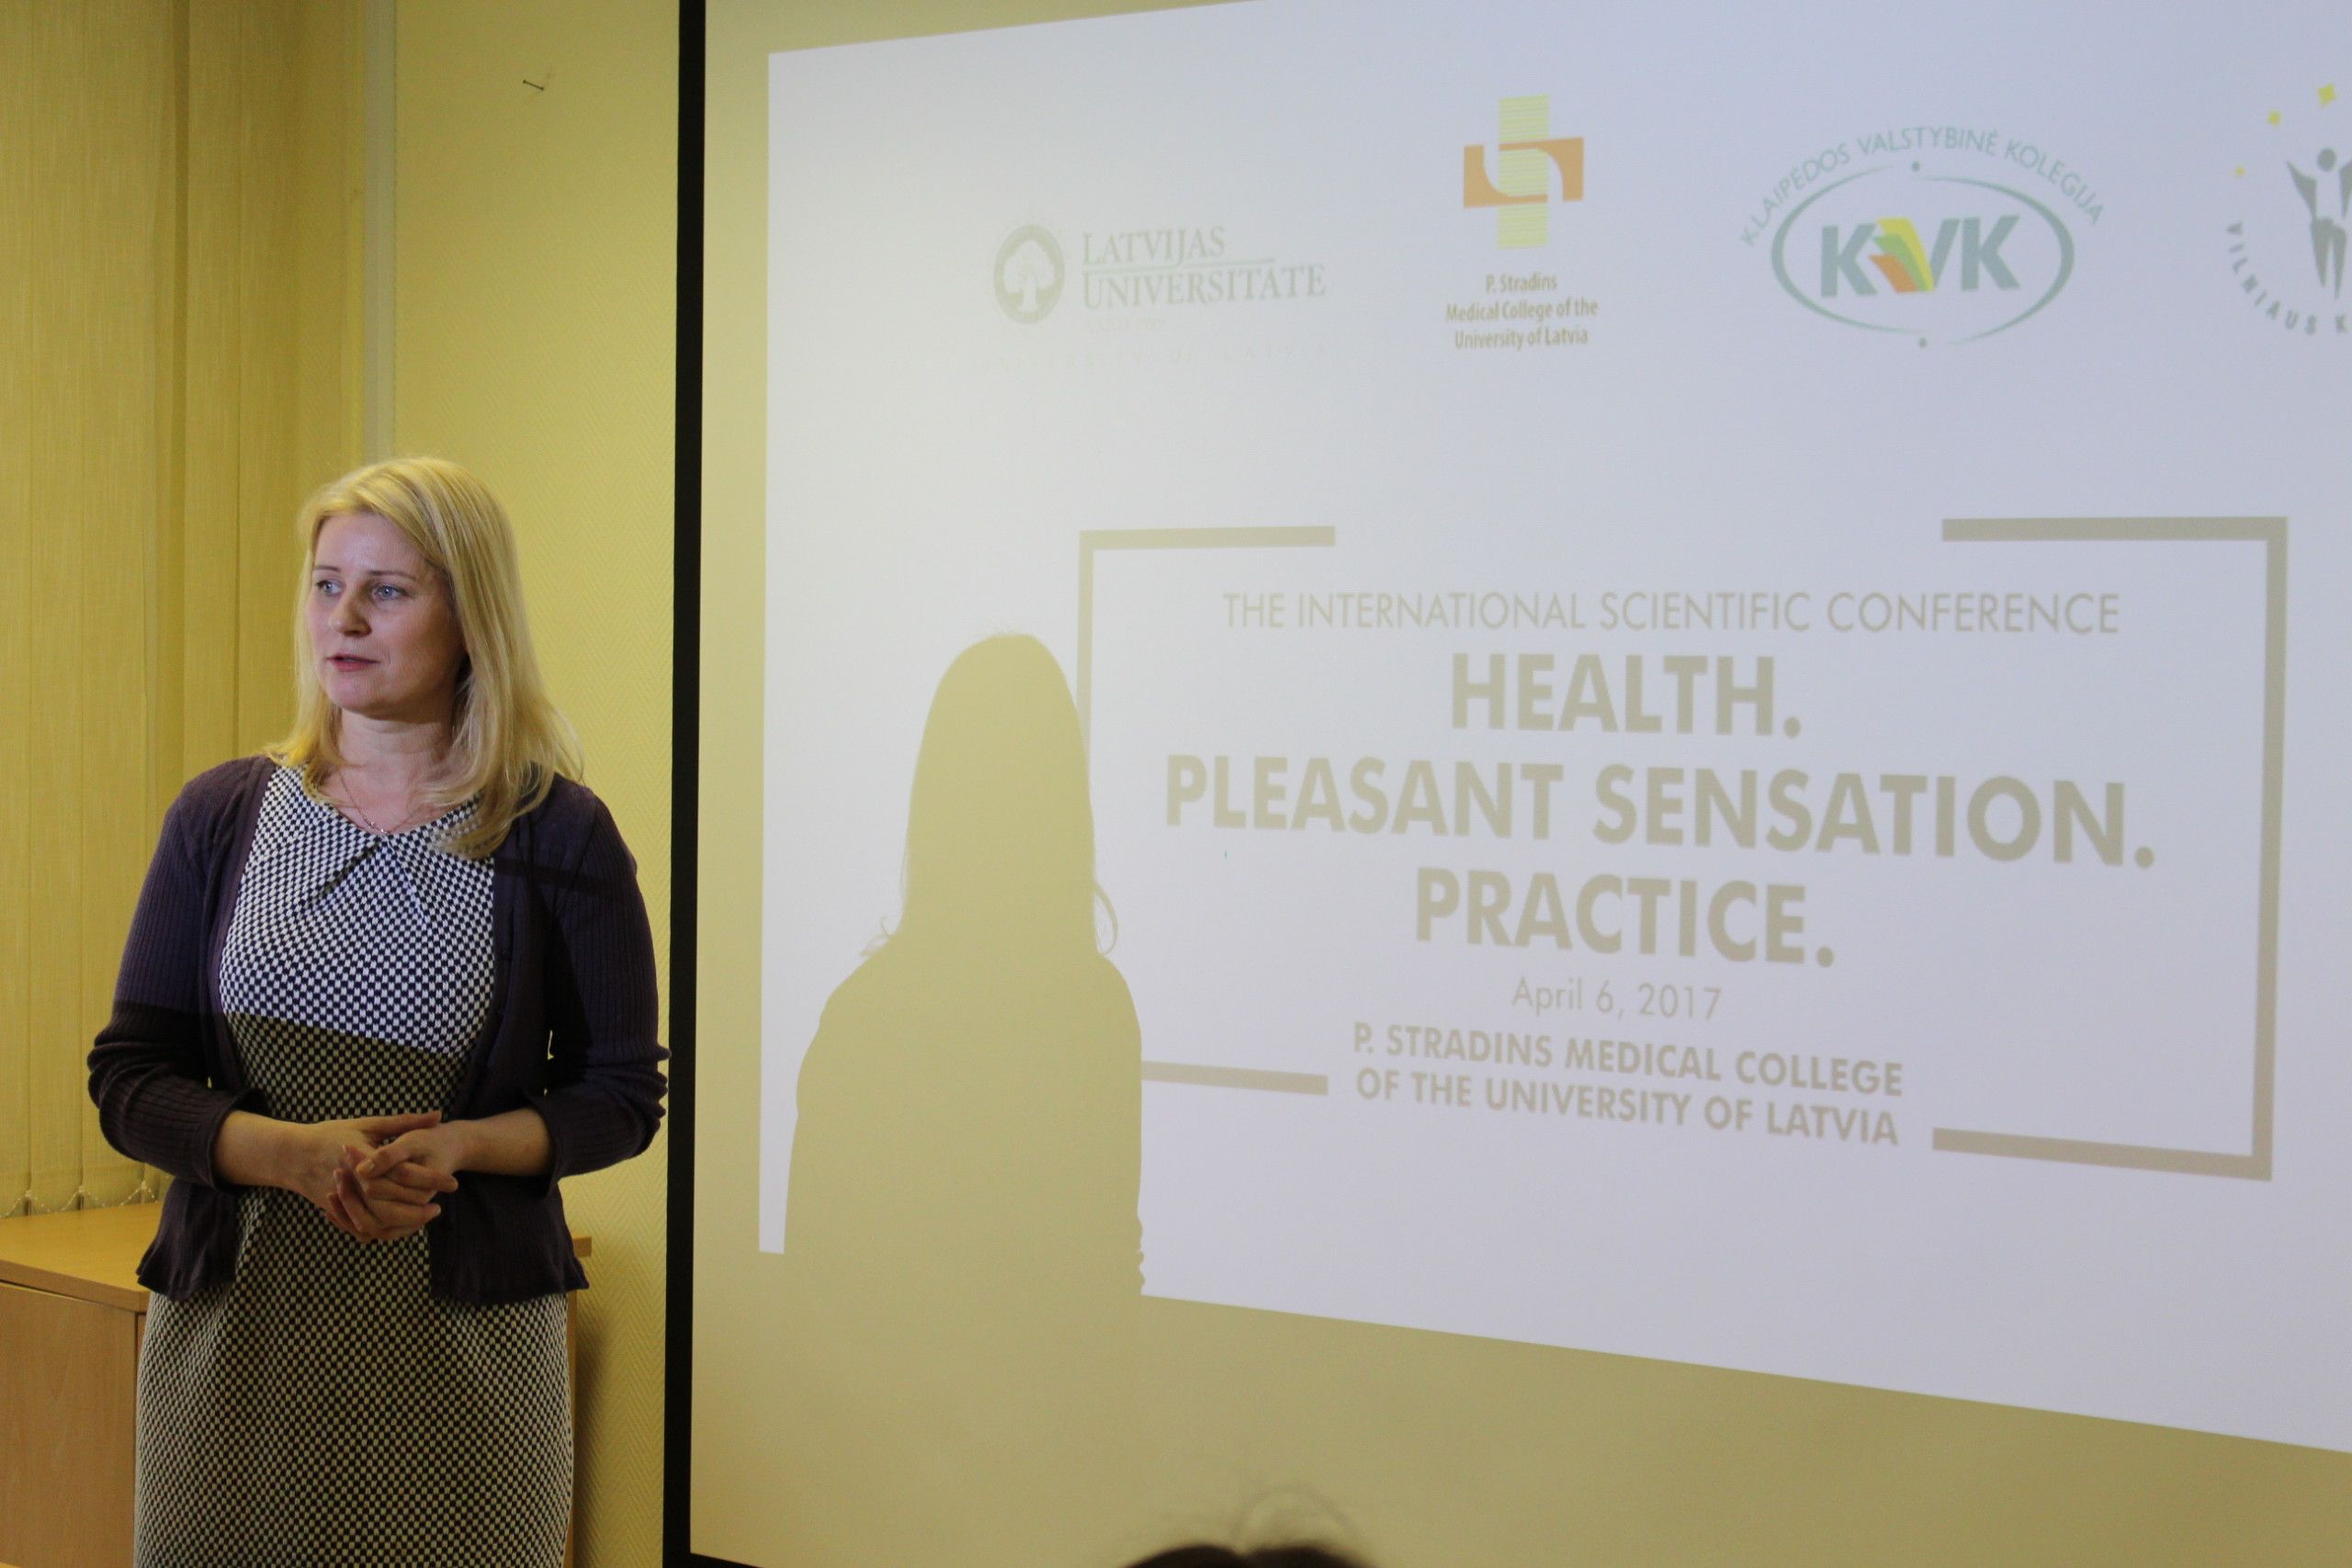 The 1st International Scientific Conference “HEALTH. PLEASANT SENSATION. PRACTICE.” P. Stradins Medical College of the University of Latvia